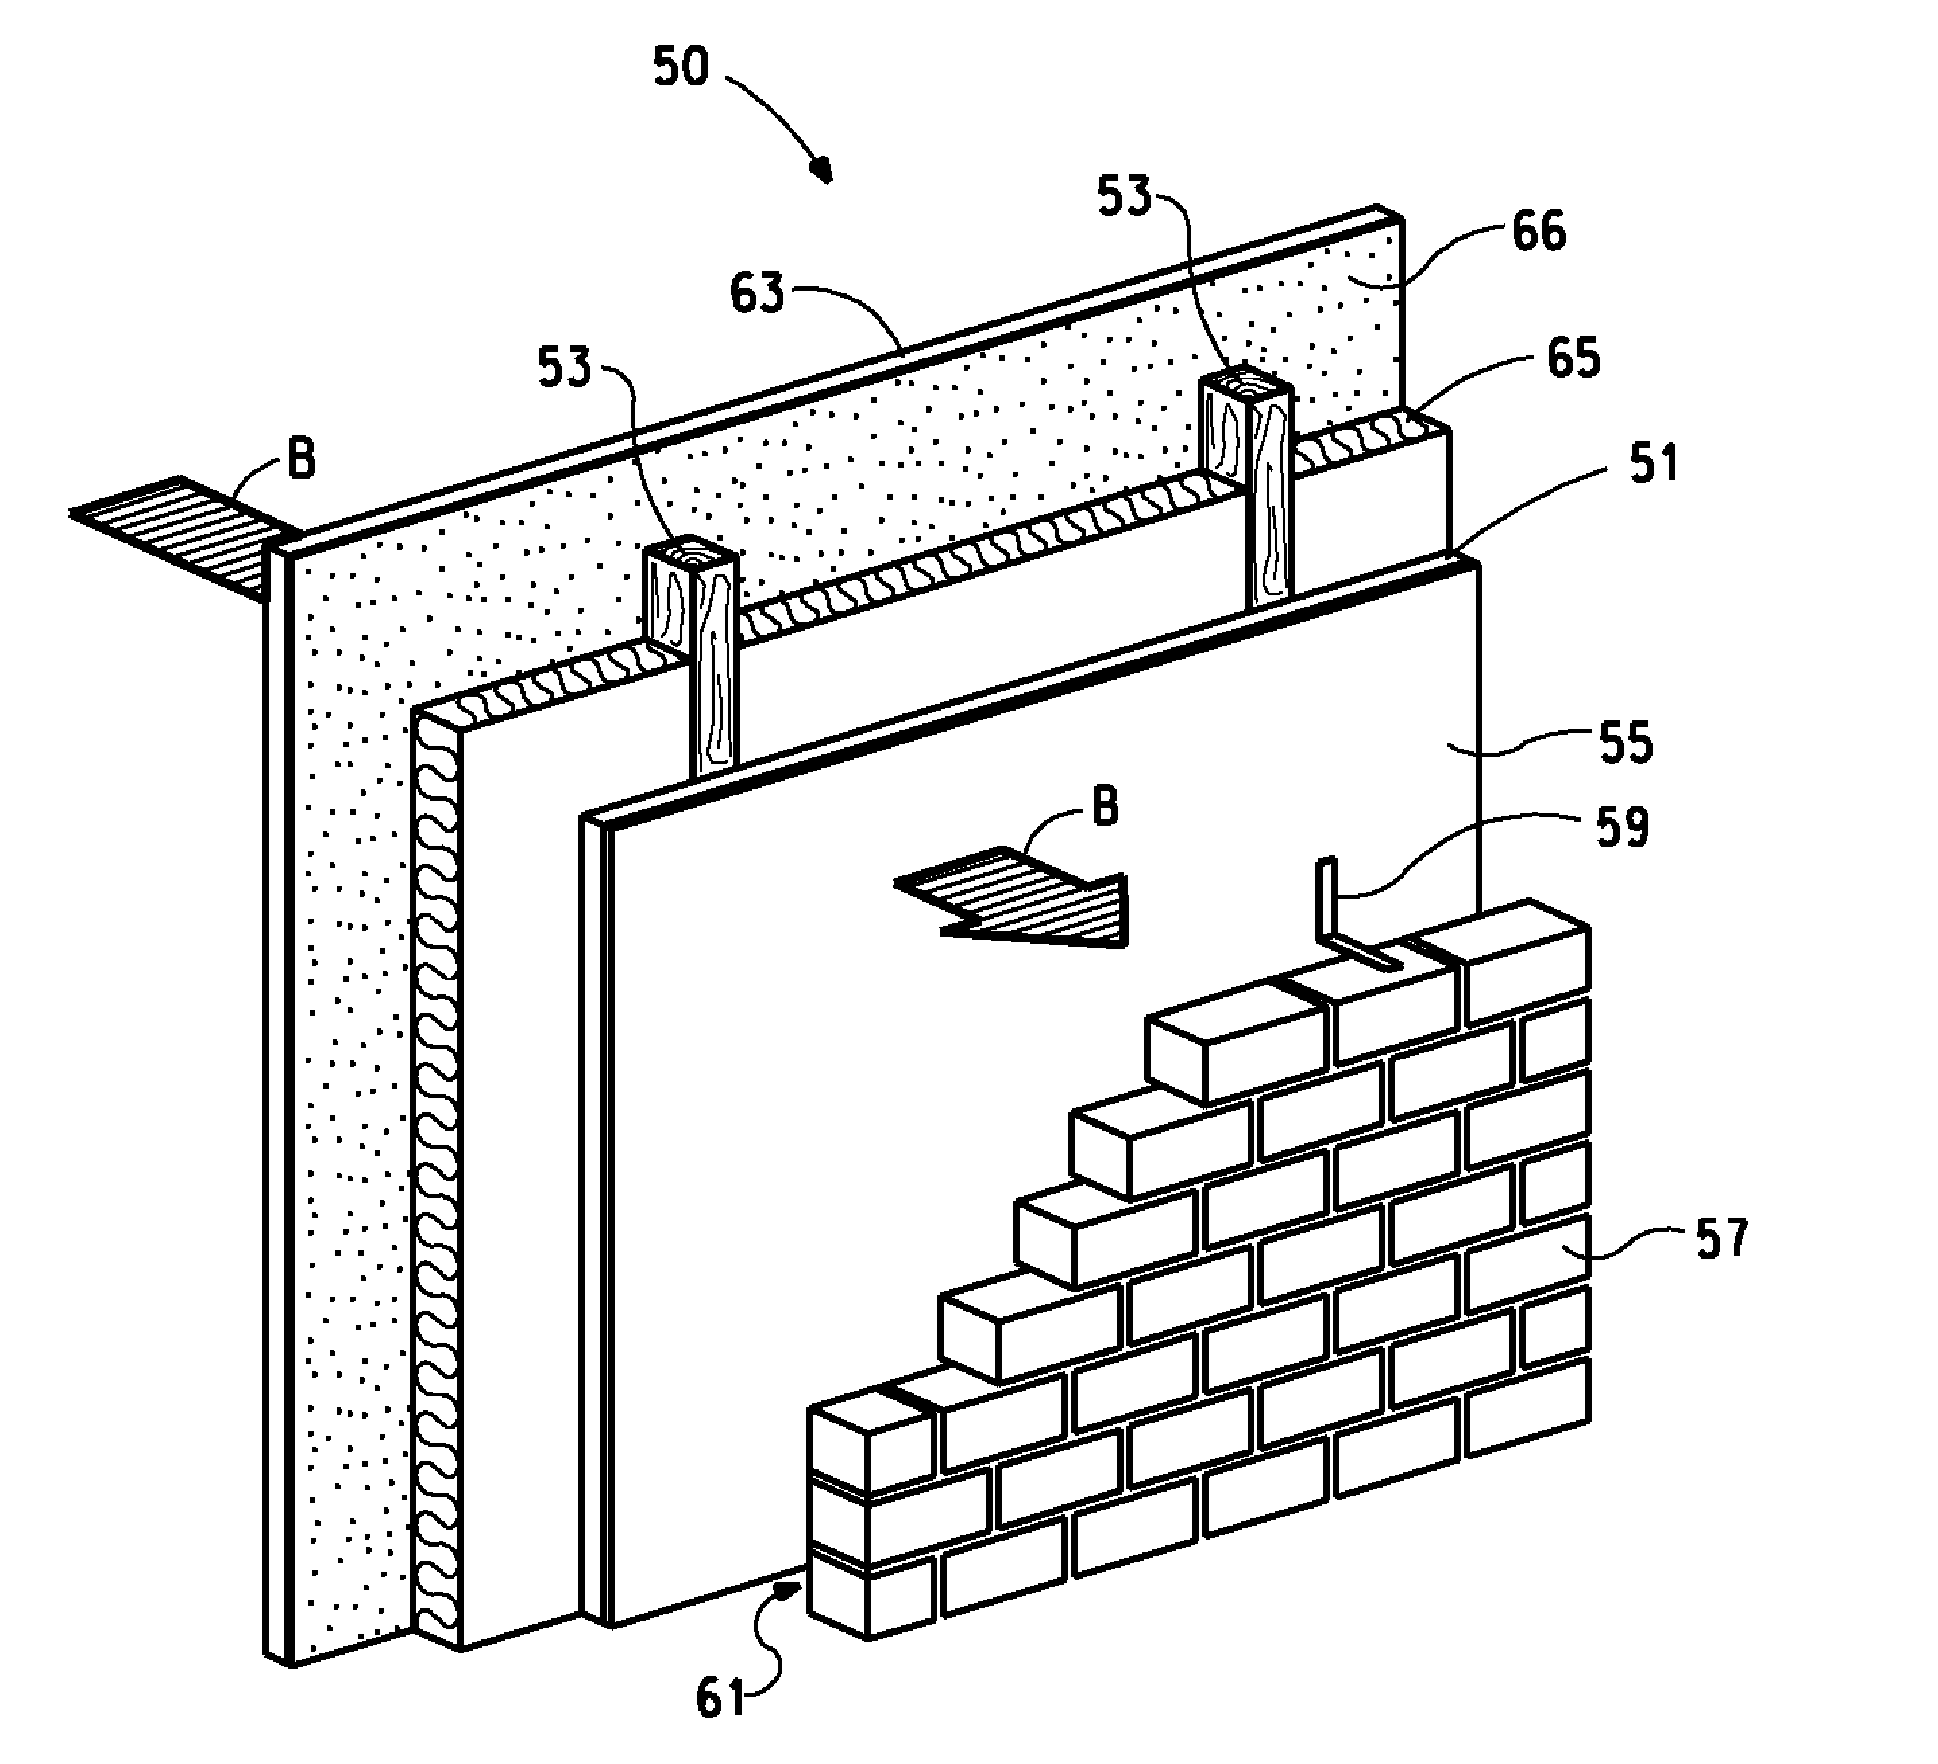 Method for producing metalized fibrous composite sheet with olefin coating